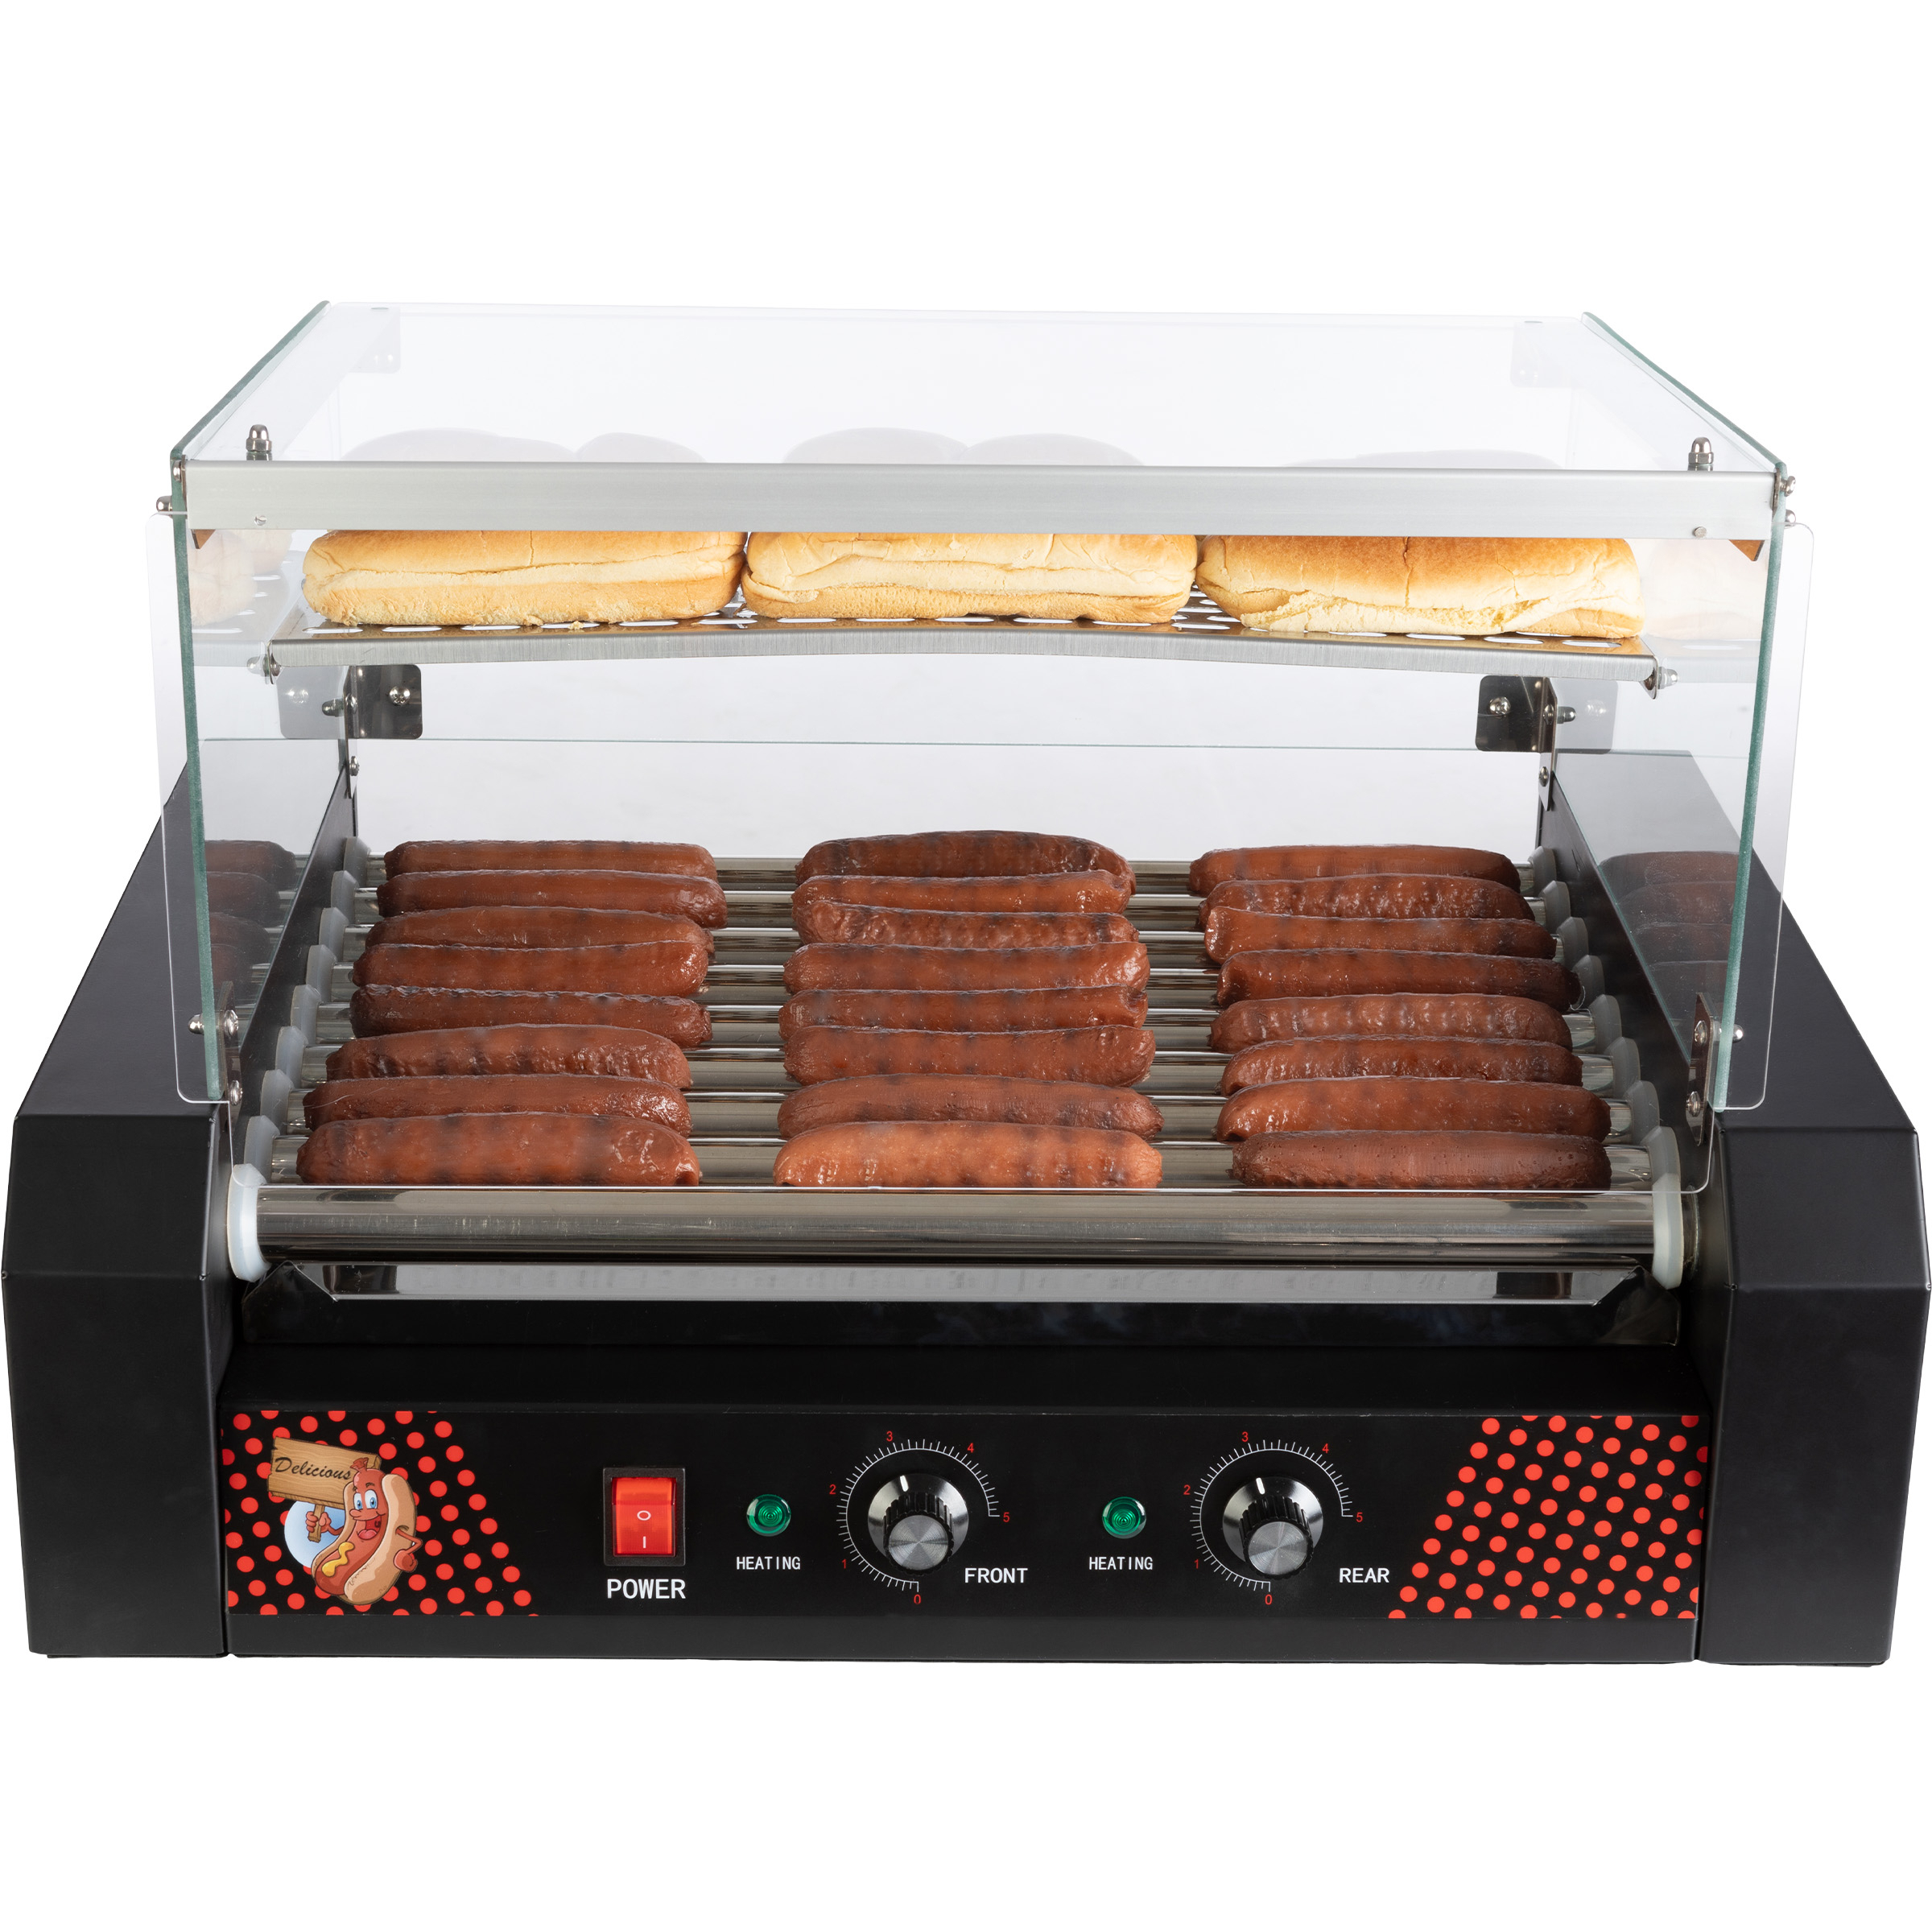 GNP Hotdog Roller Grill 9 Roller Bun Warmer And Cover Stainless Steel